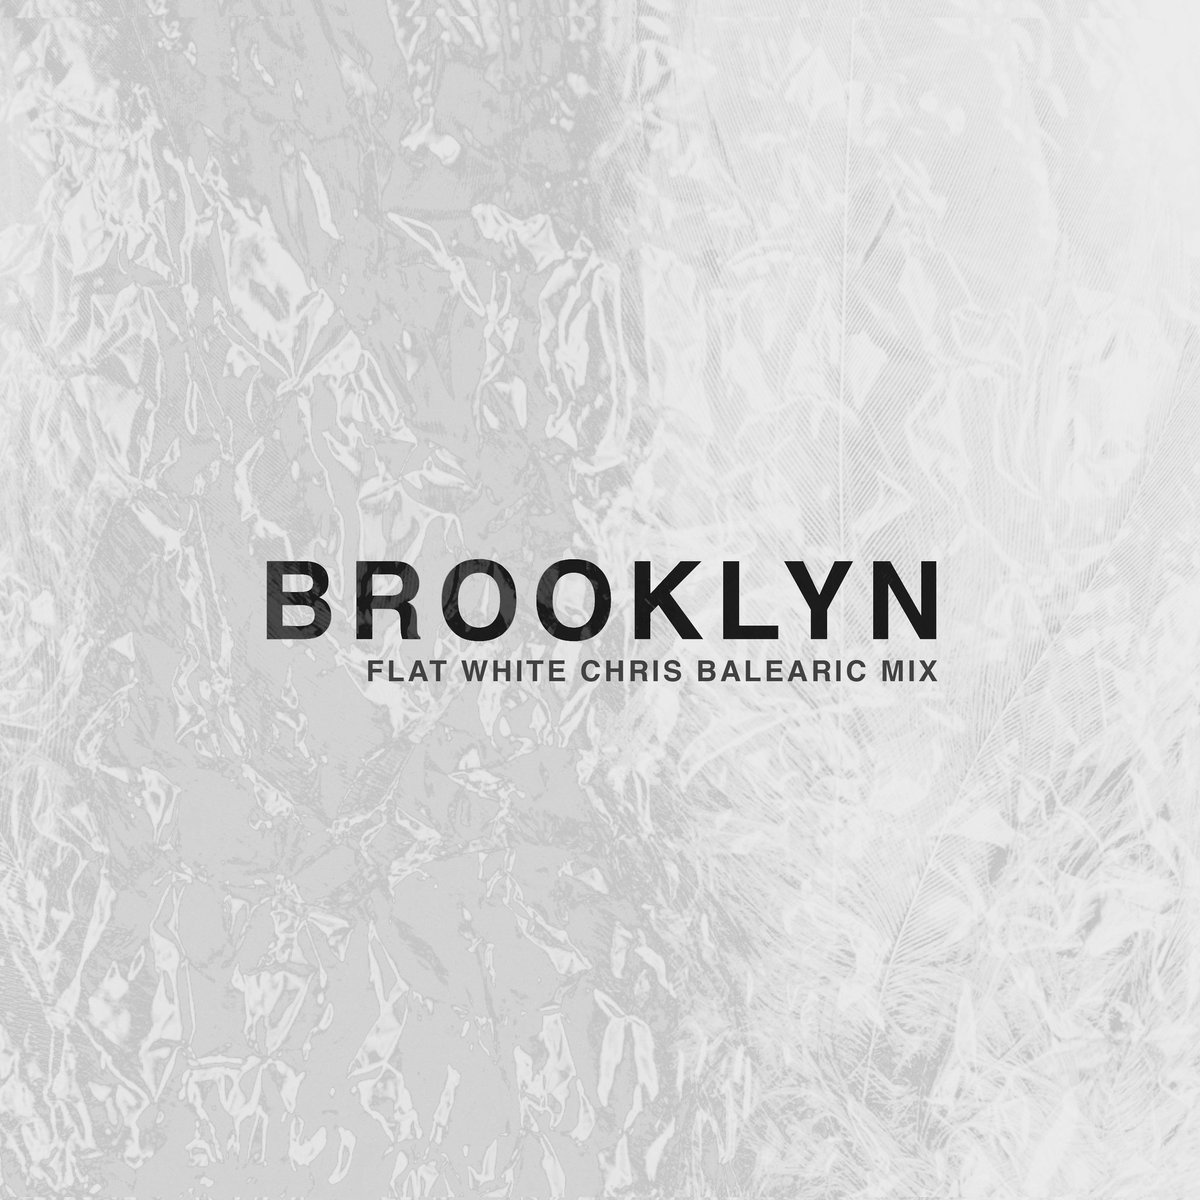 We are delighted to have fellow Leicester artist @flatwhitechris remix ‘Brooklyn’ from our latest album! It's a summer song for these warm days, can't wait for you to hear this version 🌴 It's out next Friday - July 1st 🥳 Get it pre-saved here: bfan.link/brooklyn-flat-…